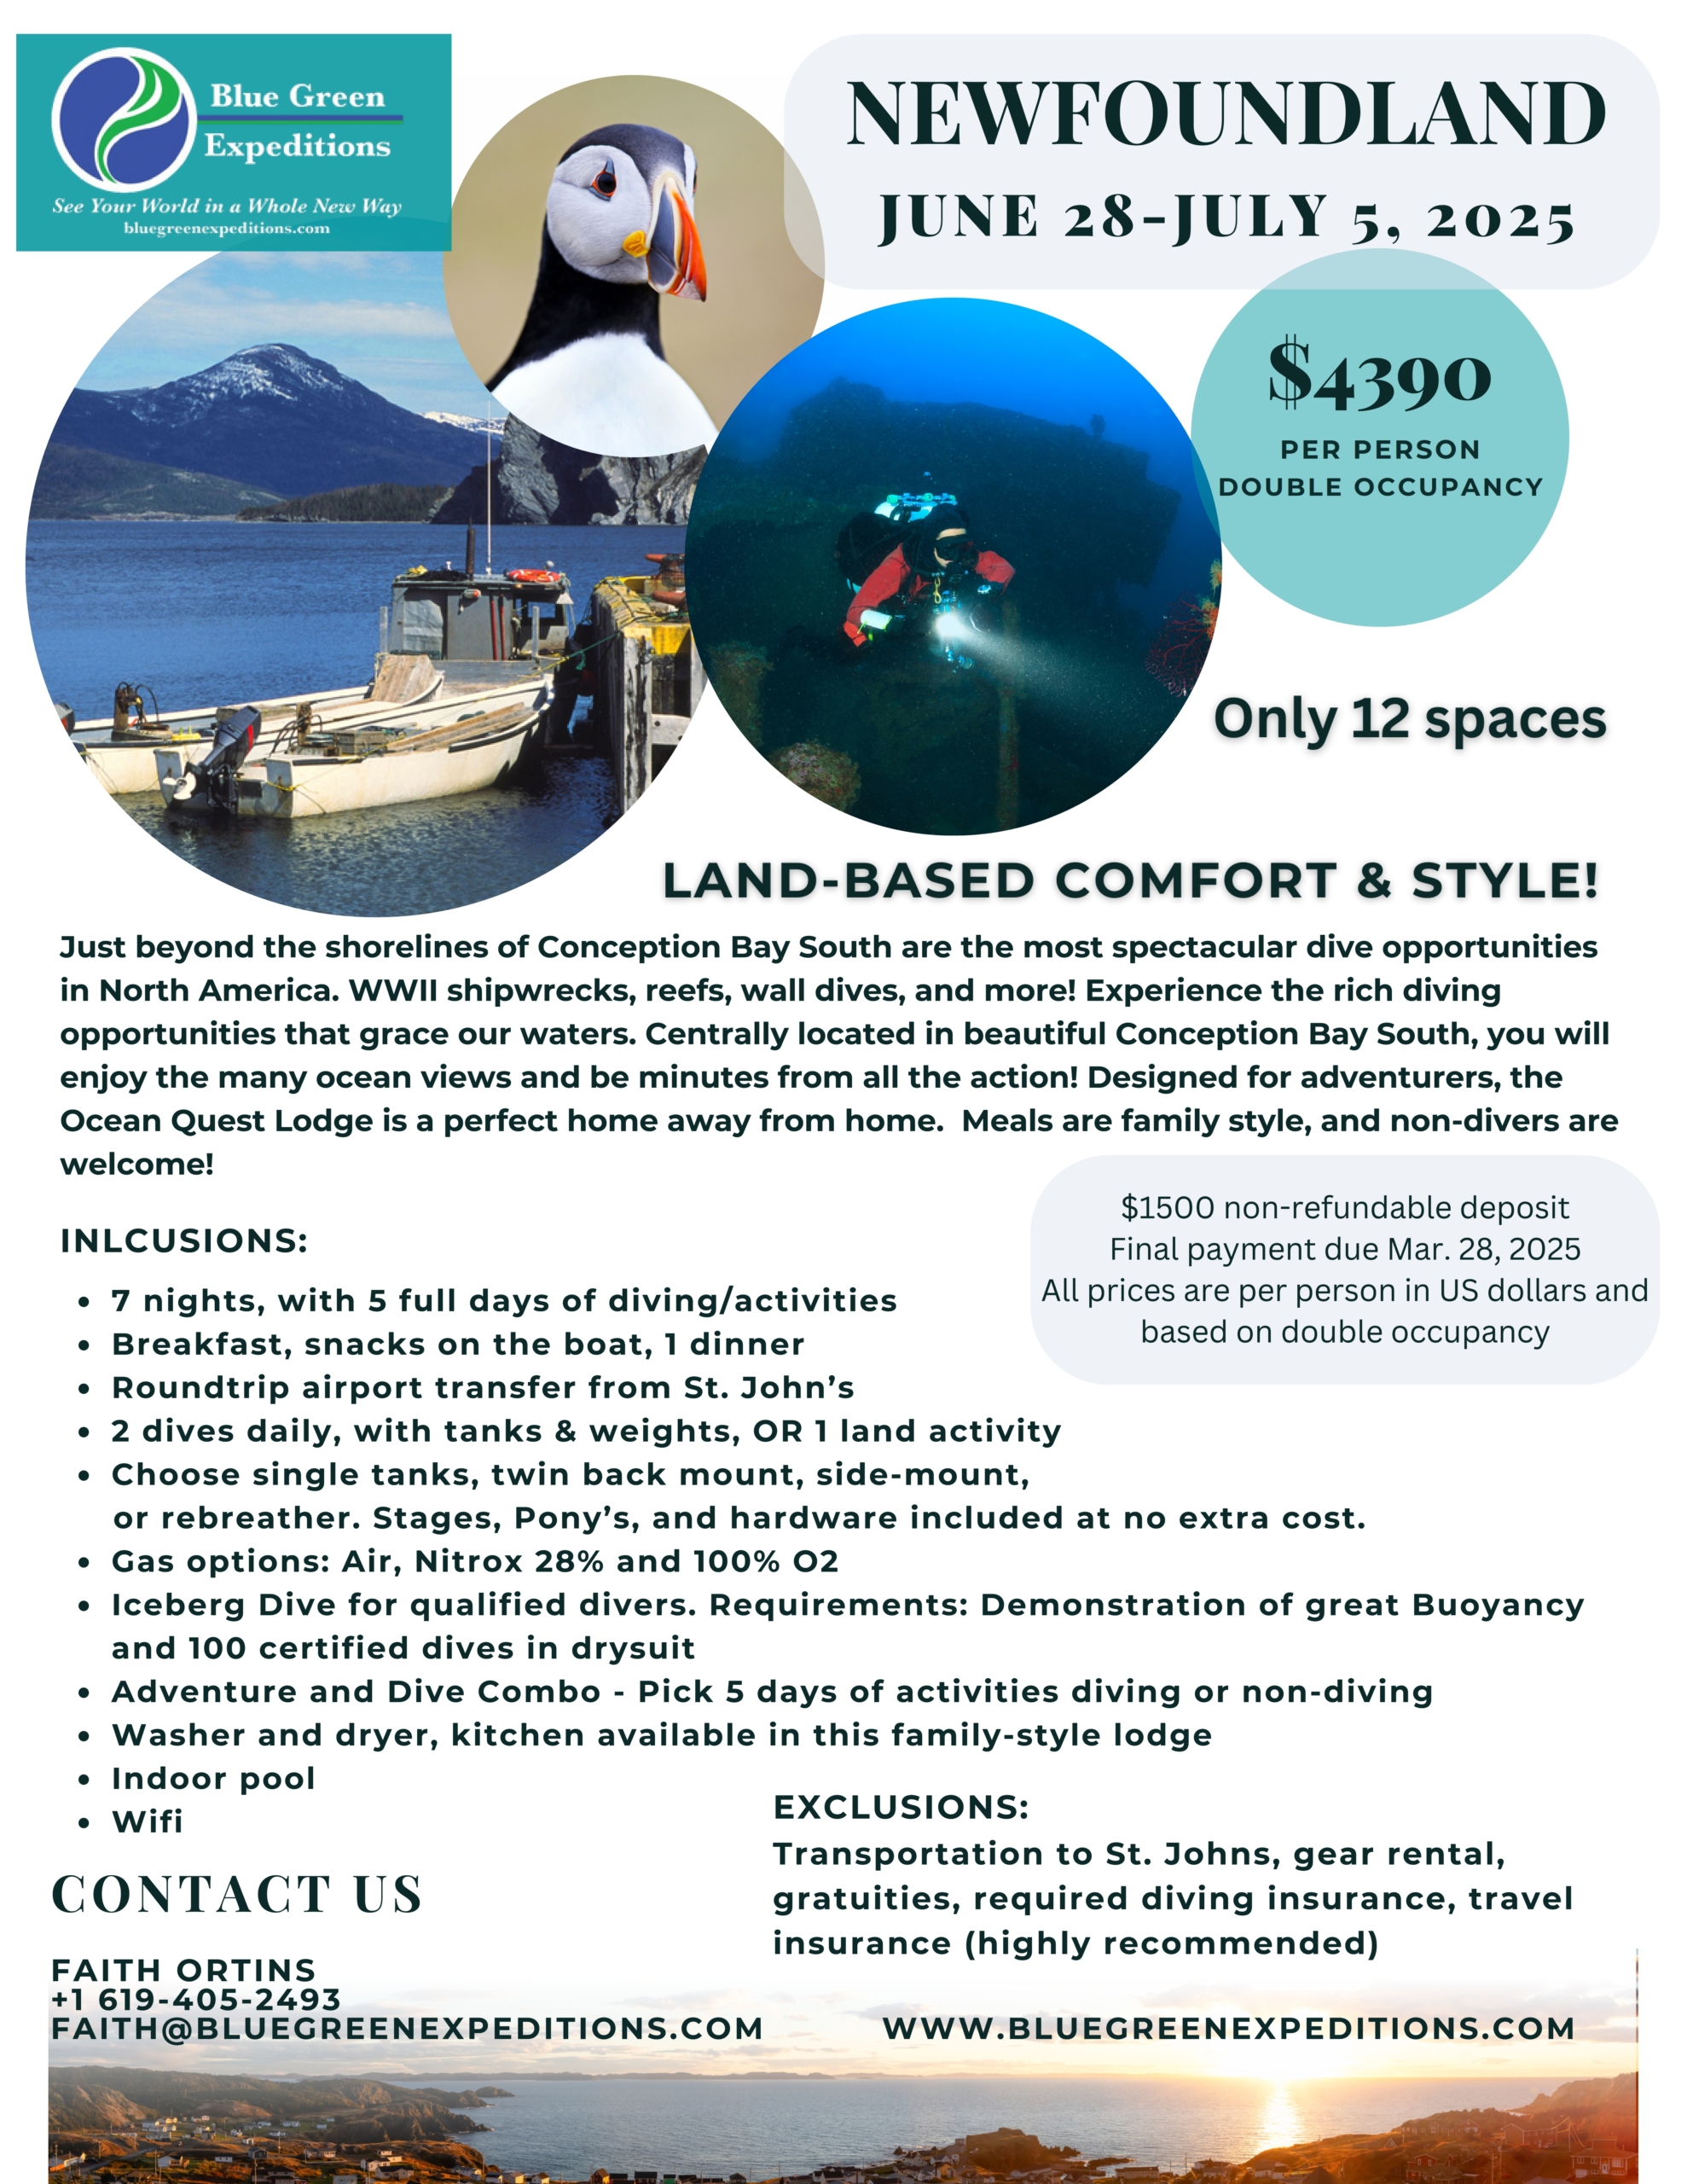 Newfoundland , June 28- July 5, 2025. Expedition description and pricing.